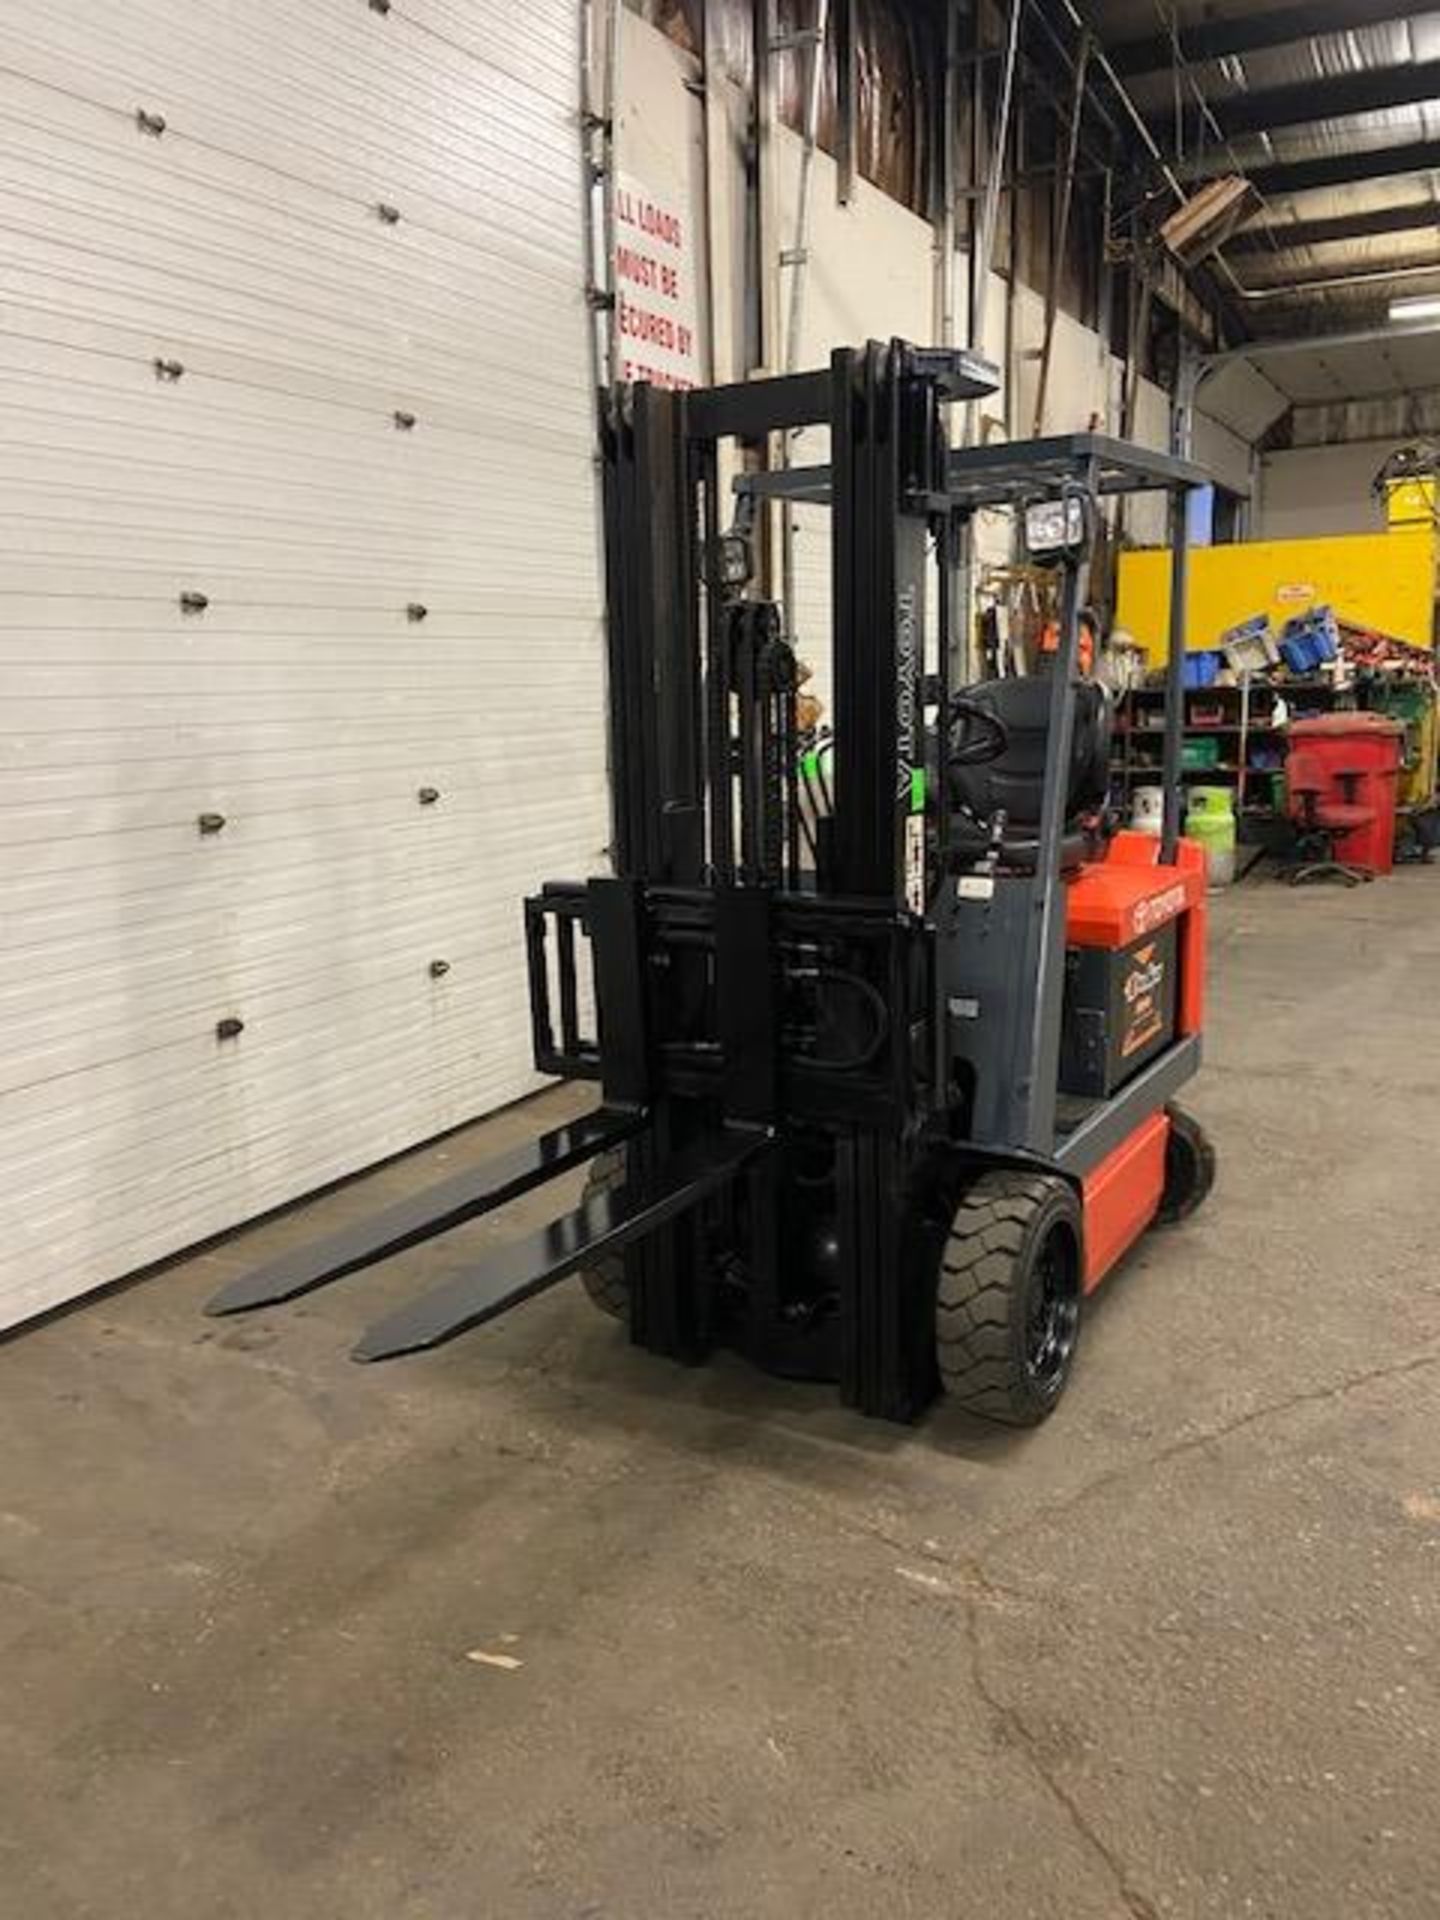 FREE CUSTOMS - Toyota 4000lbs Capacity Forklift Electric with 3-stage mast & sideshift - Image 2 of 3